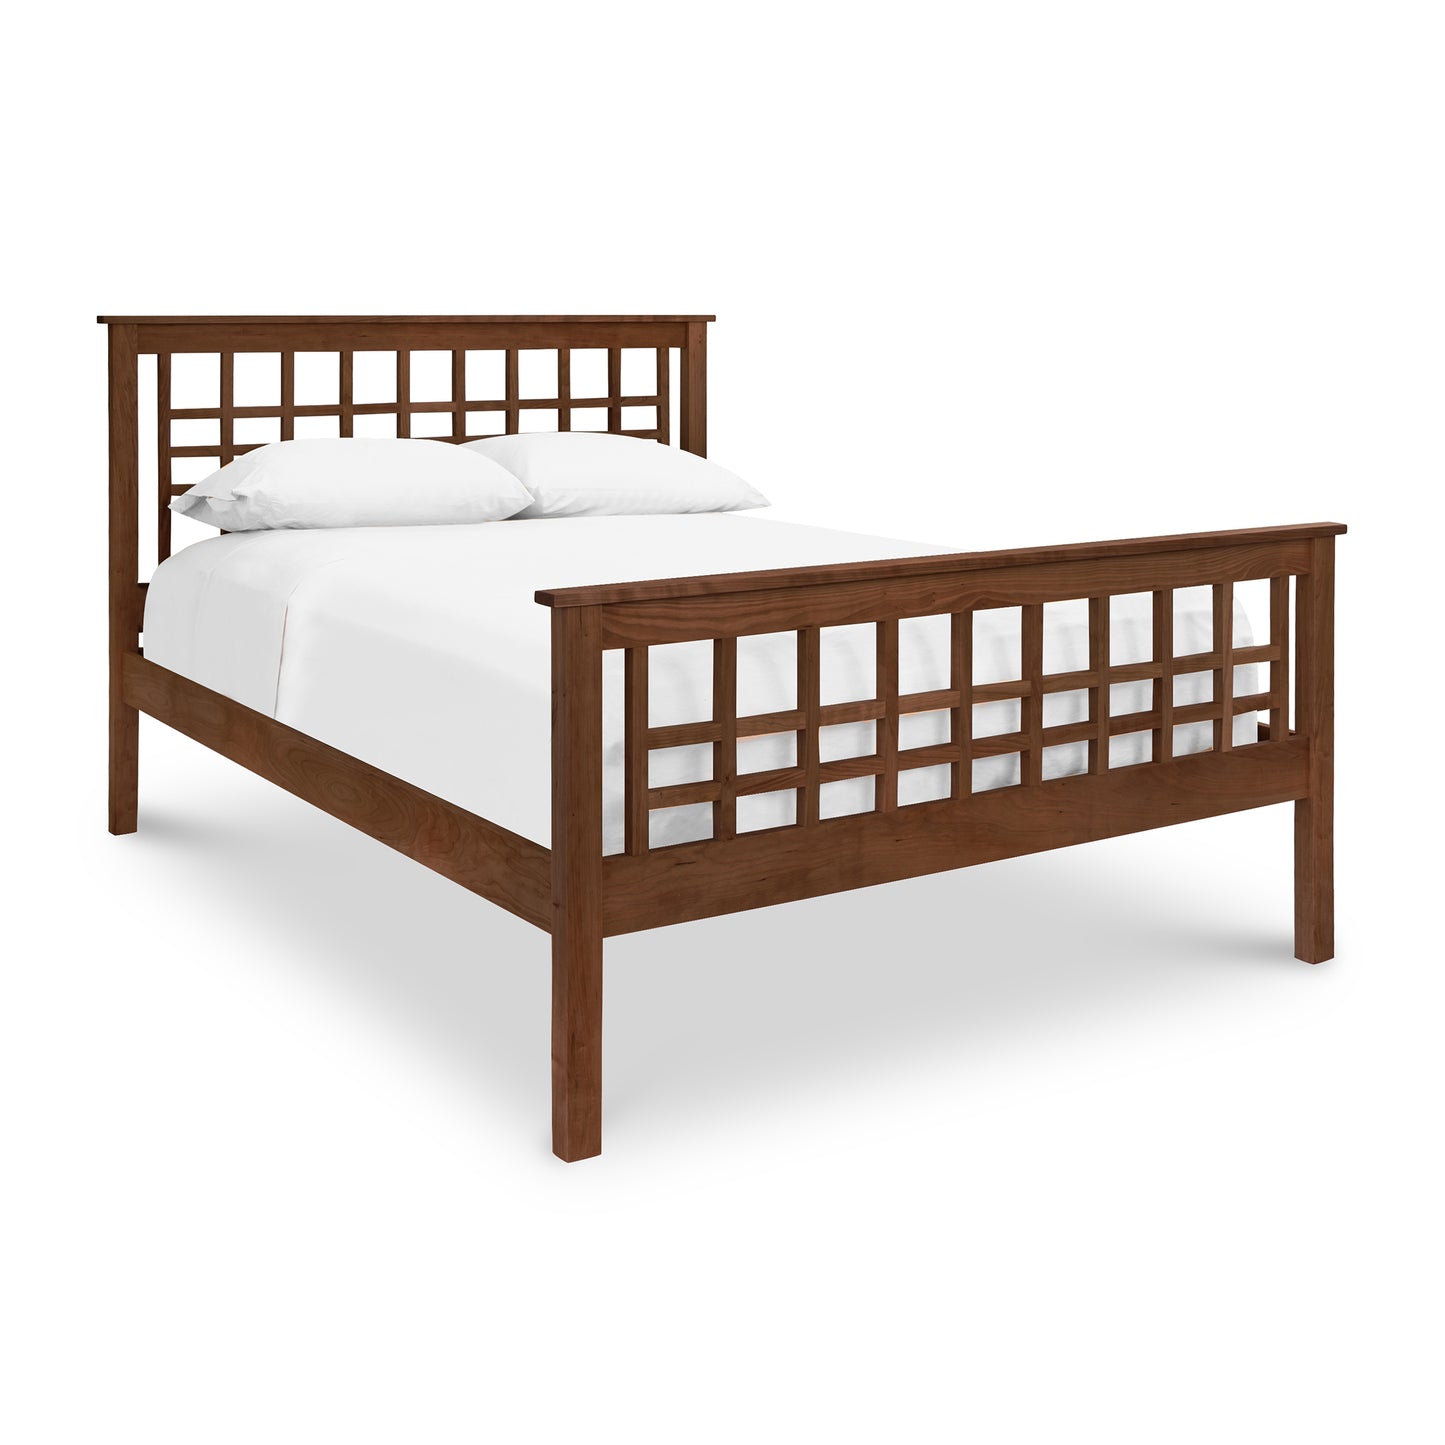 A Modern Craftsman High Footboard Bed with a modern Craftsman wooden frame and white sheets in a contemporary bedroom. (Brand Name: Vermont Furniture Designs)